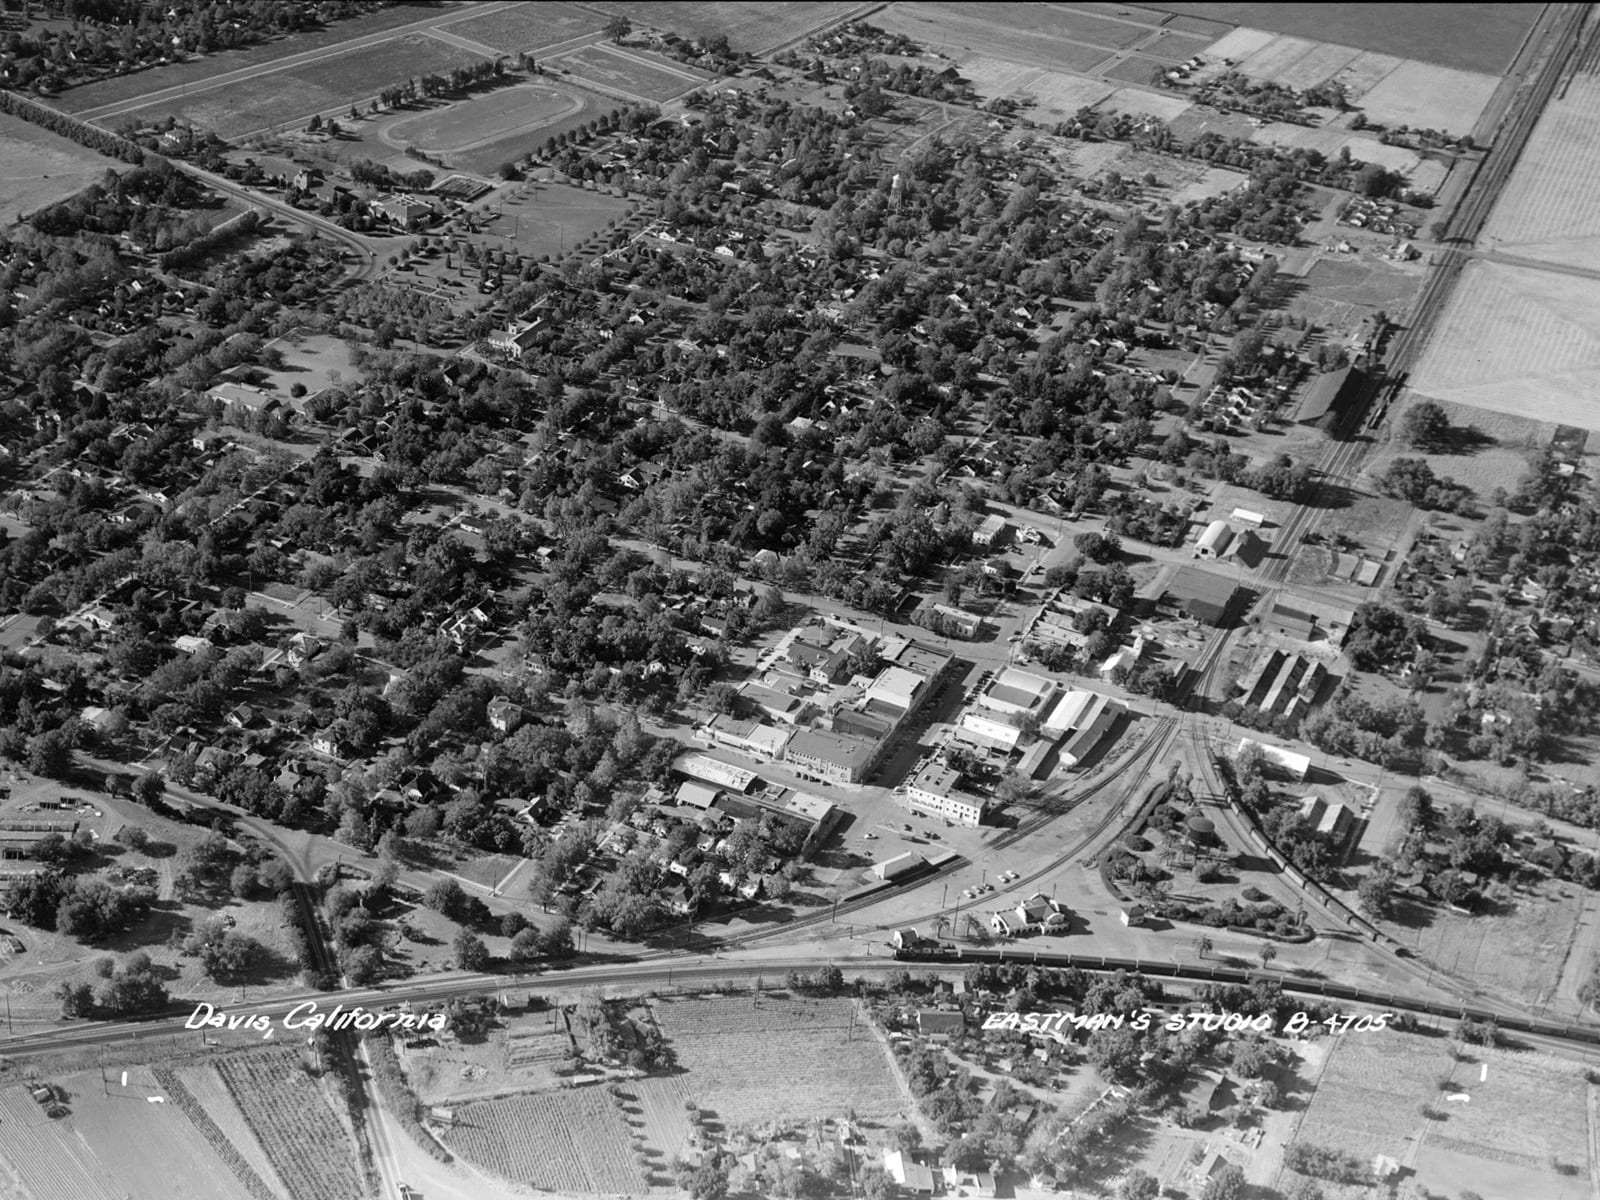 Aerial view of Davis, 1946. Note the railroad depot in the bottom right